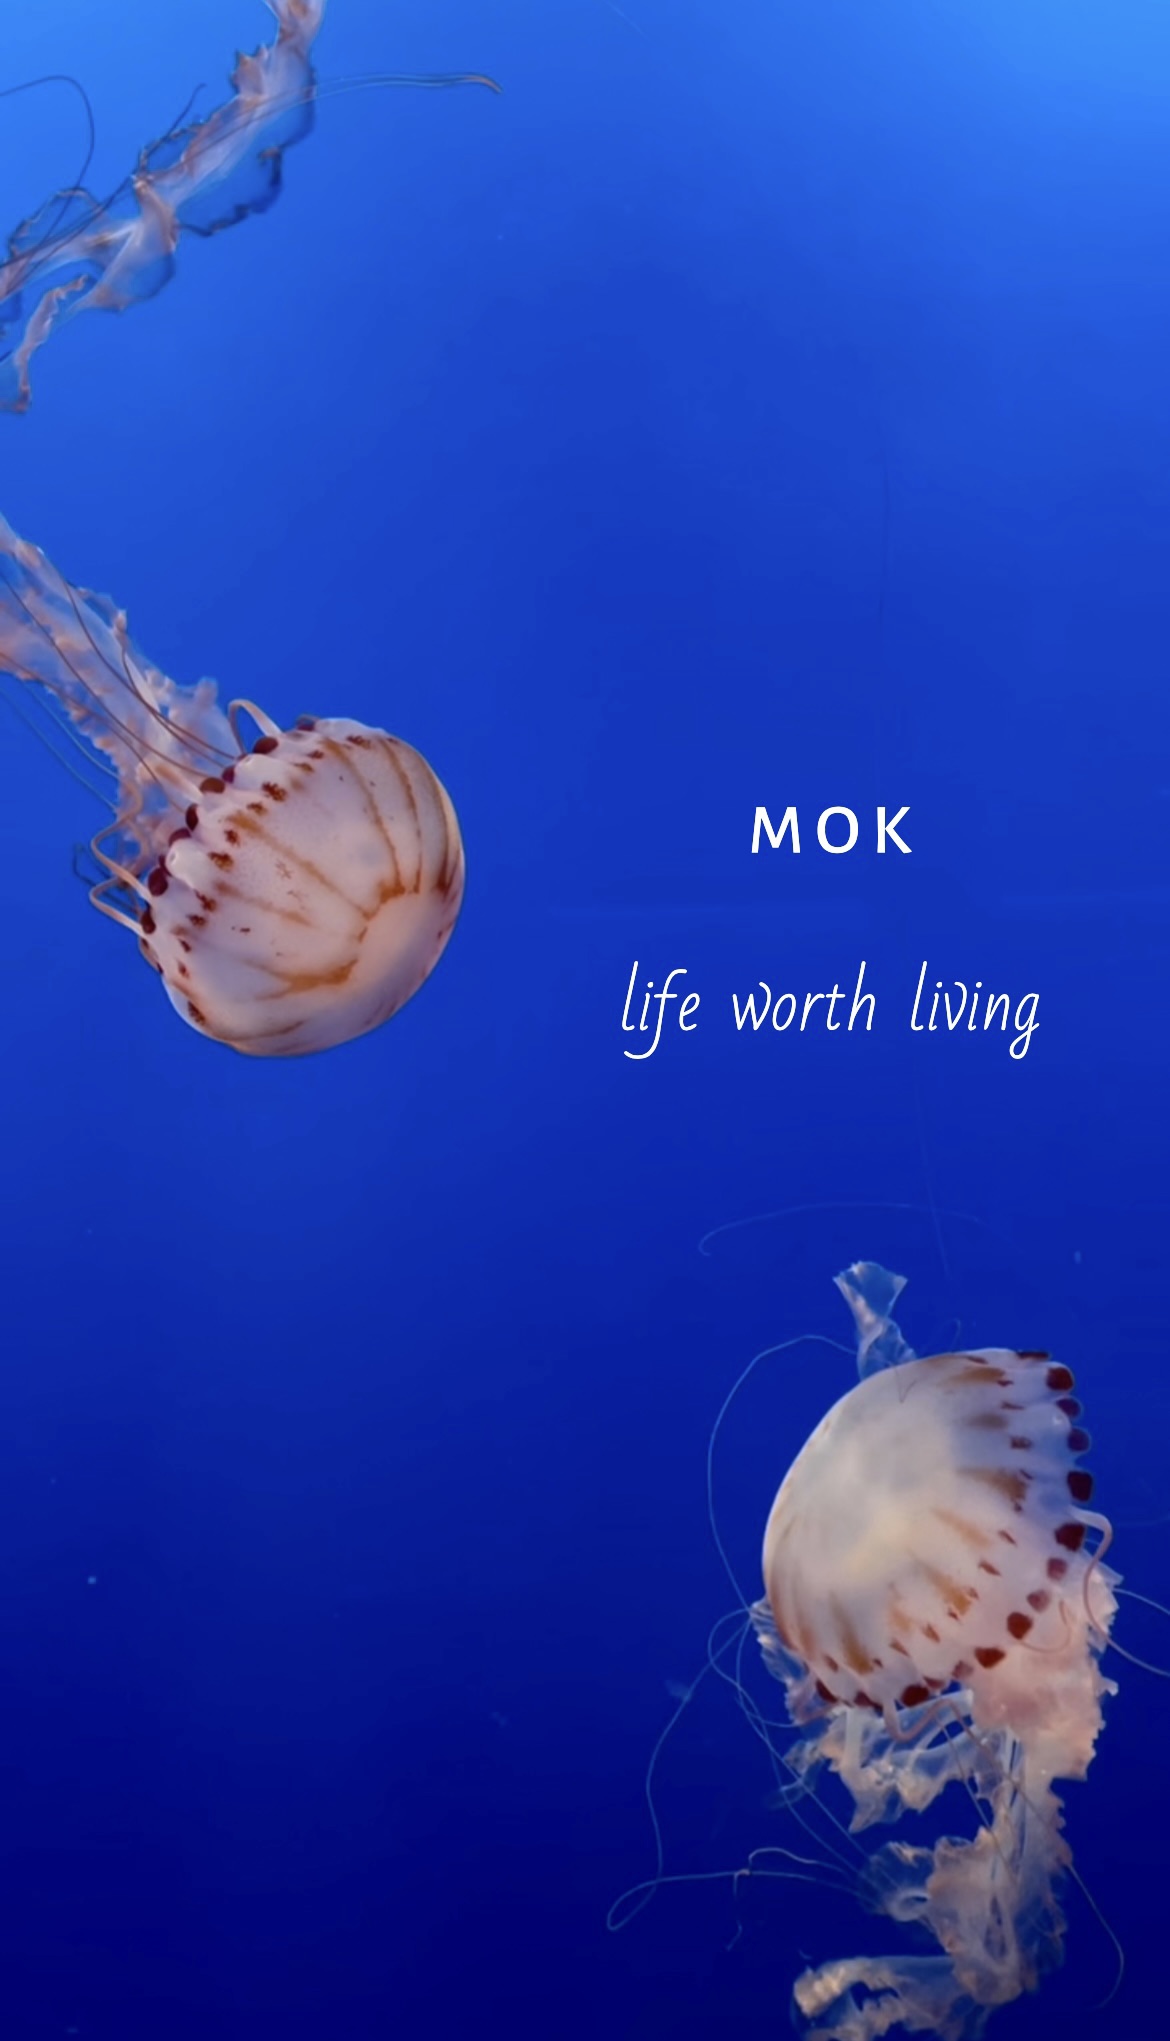 The variety is impressive on stunning new album ‘Life Worth Living’ from New York’s artist and producer ‘M O K’.